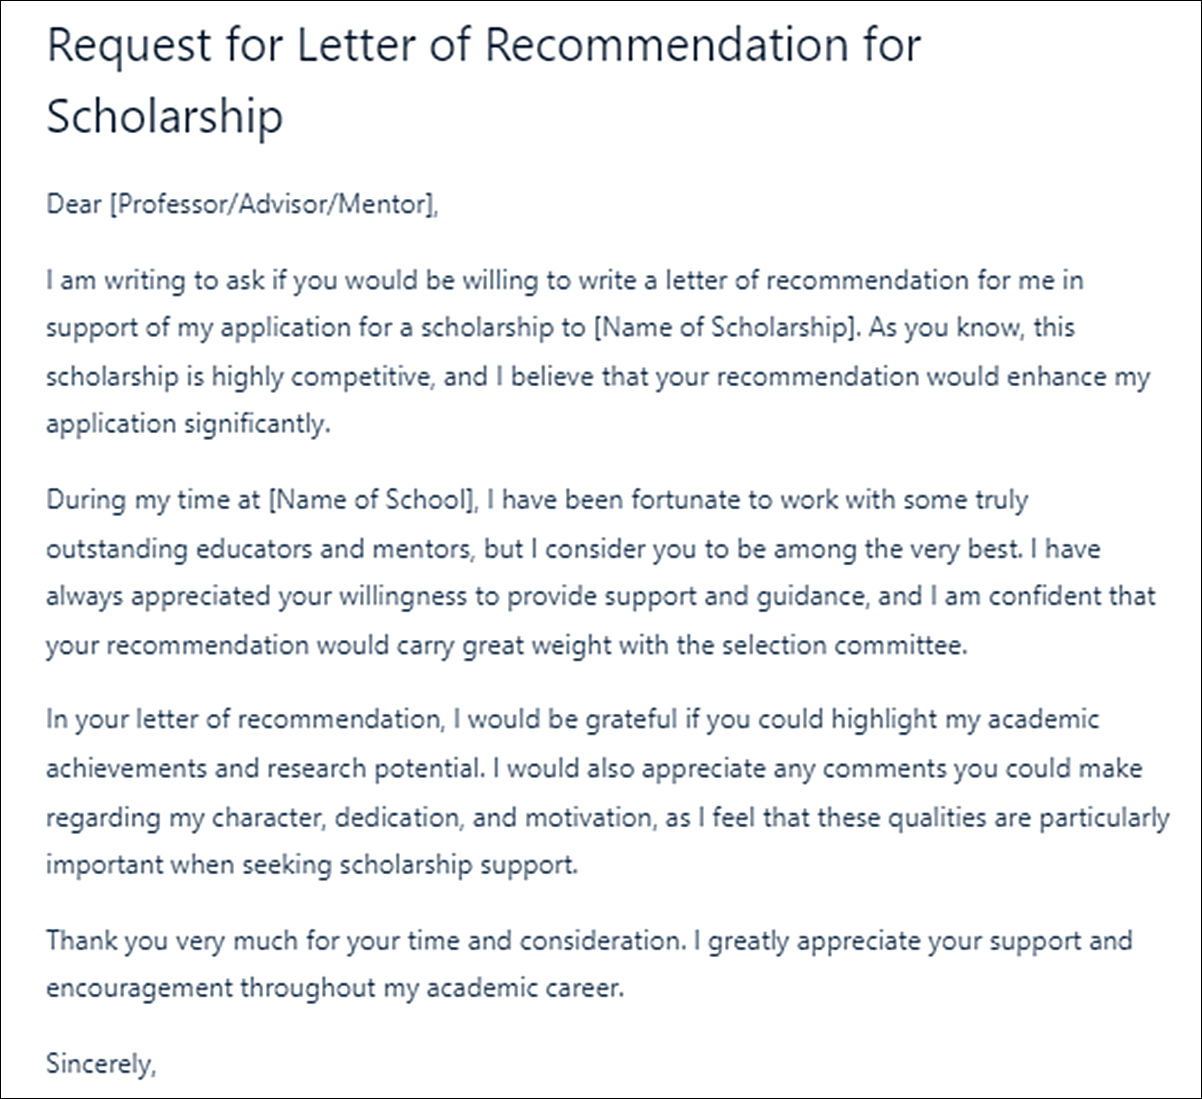 Request for Letter of Recommendation Template